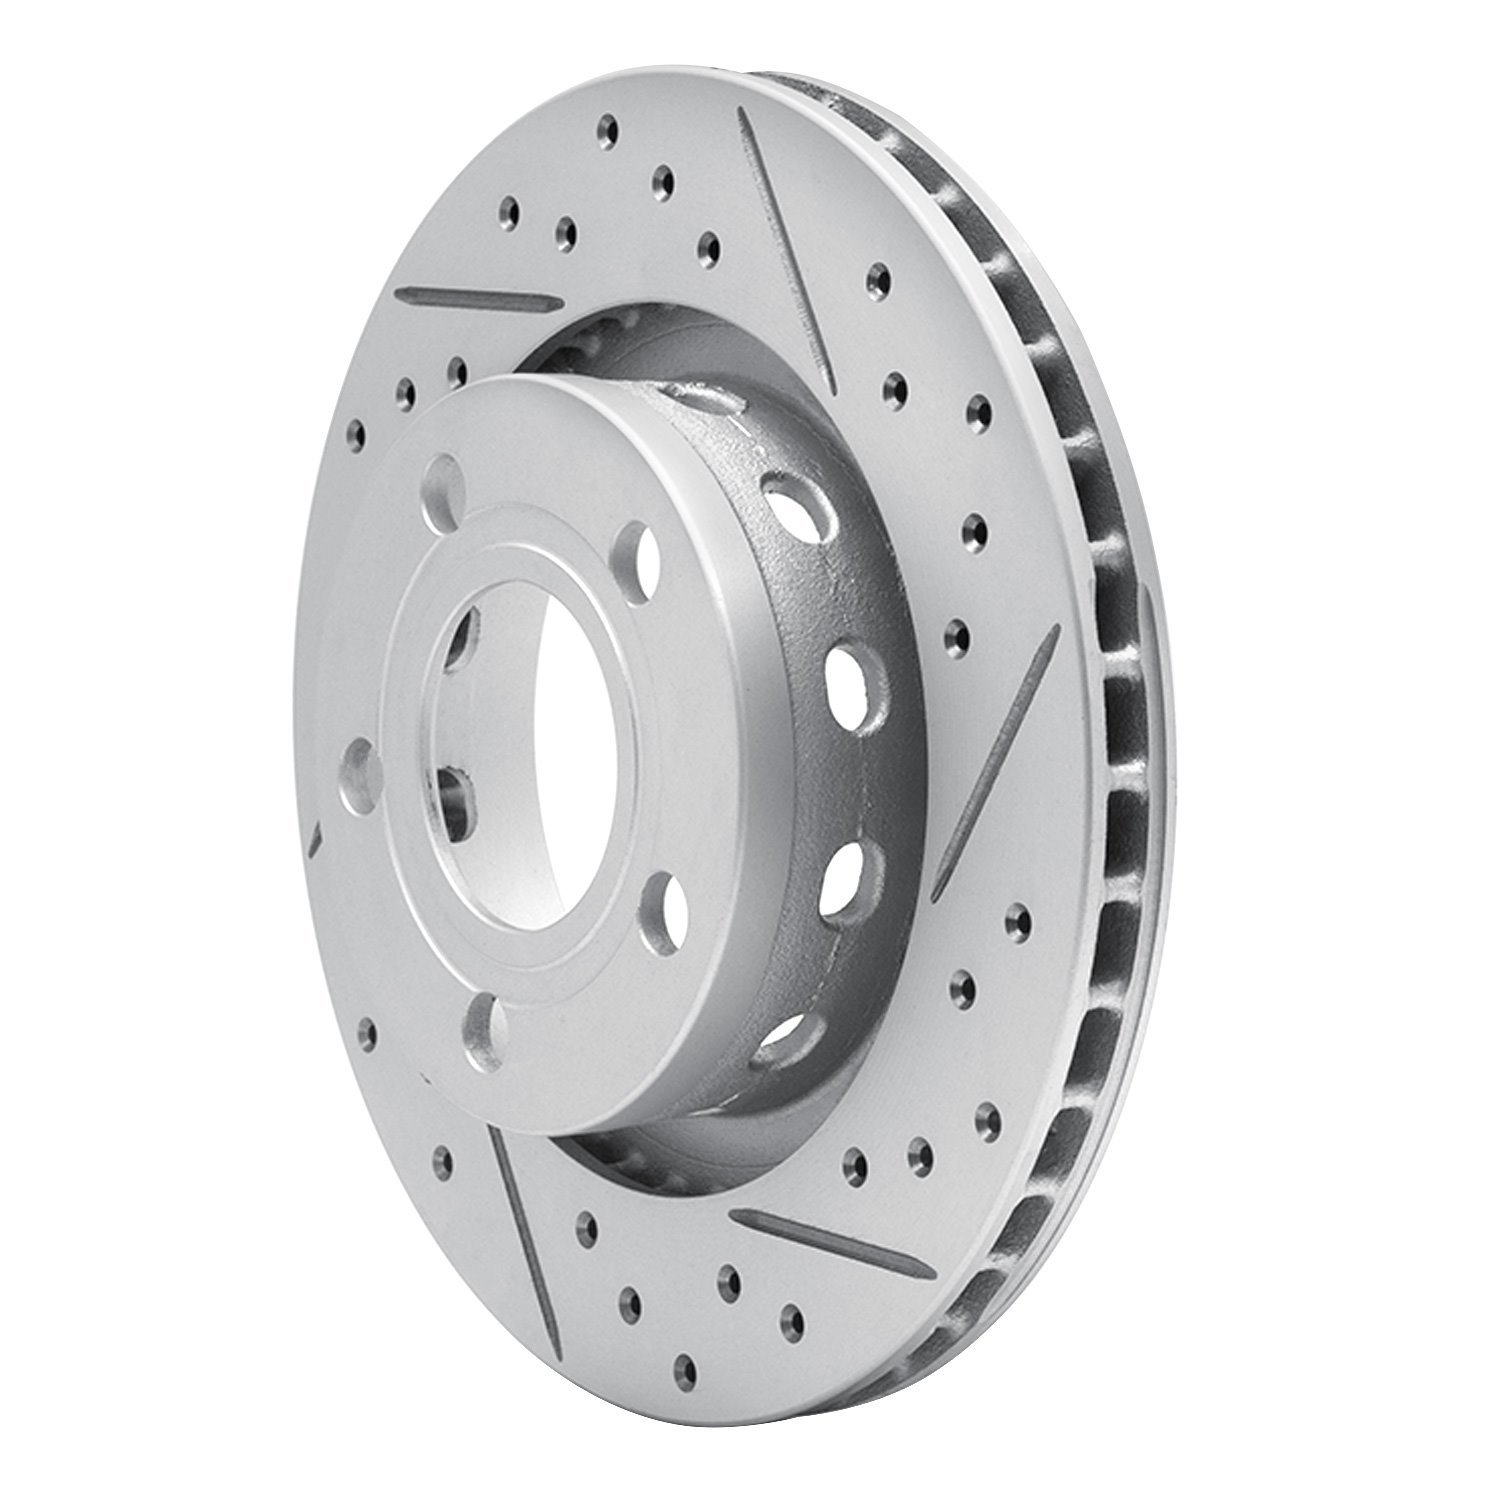 830-74023R Geoperformance Drilled/Slotted Brake Rotor, 1999-2005 Audi/Volkswagen, Position: Rear Right